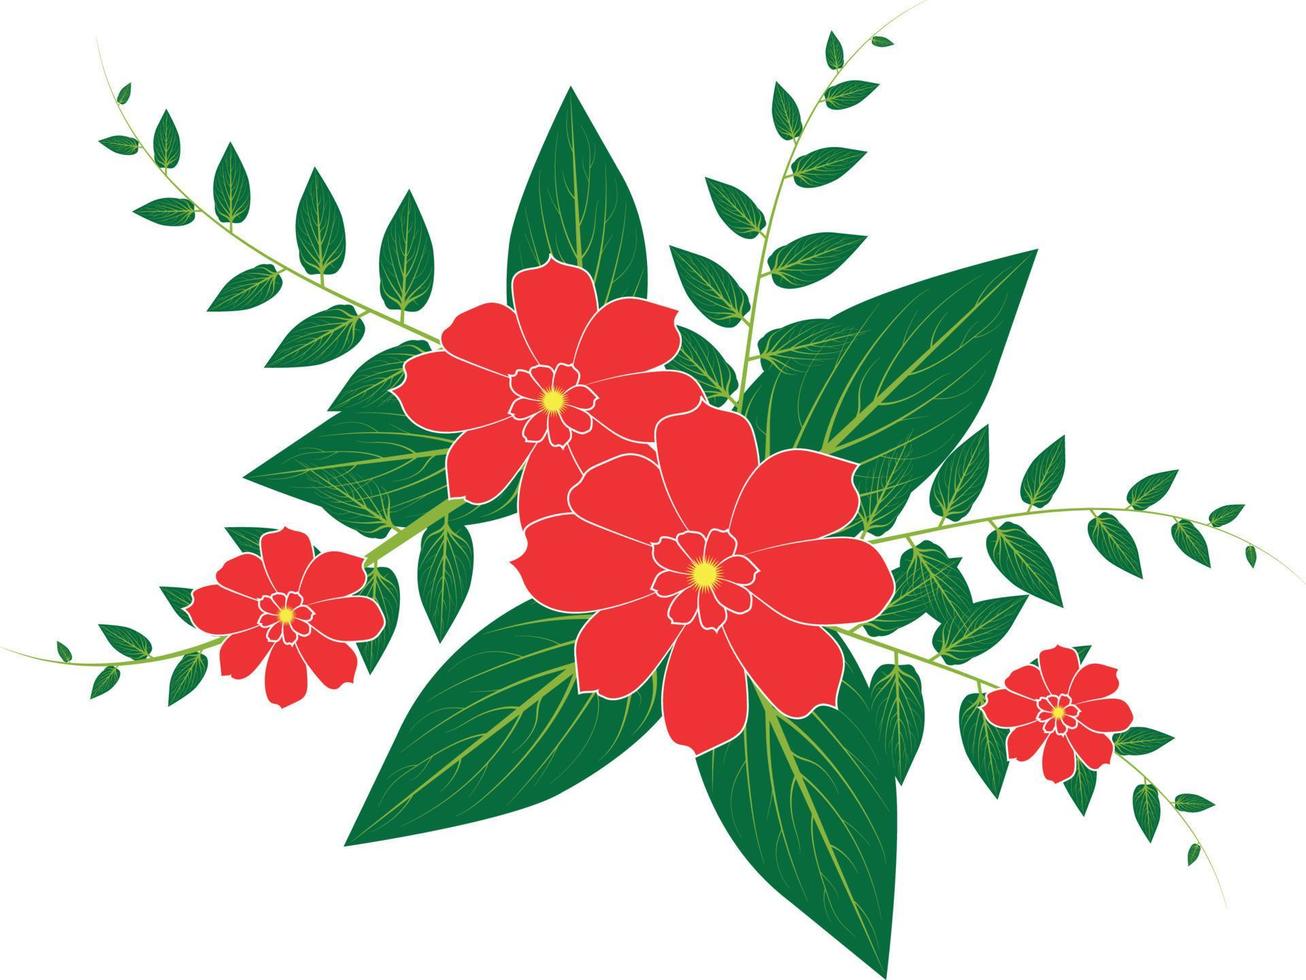 merry christmas flower with leaves and berries design, winter season and decoration theme Vector illustration